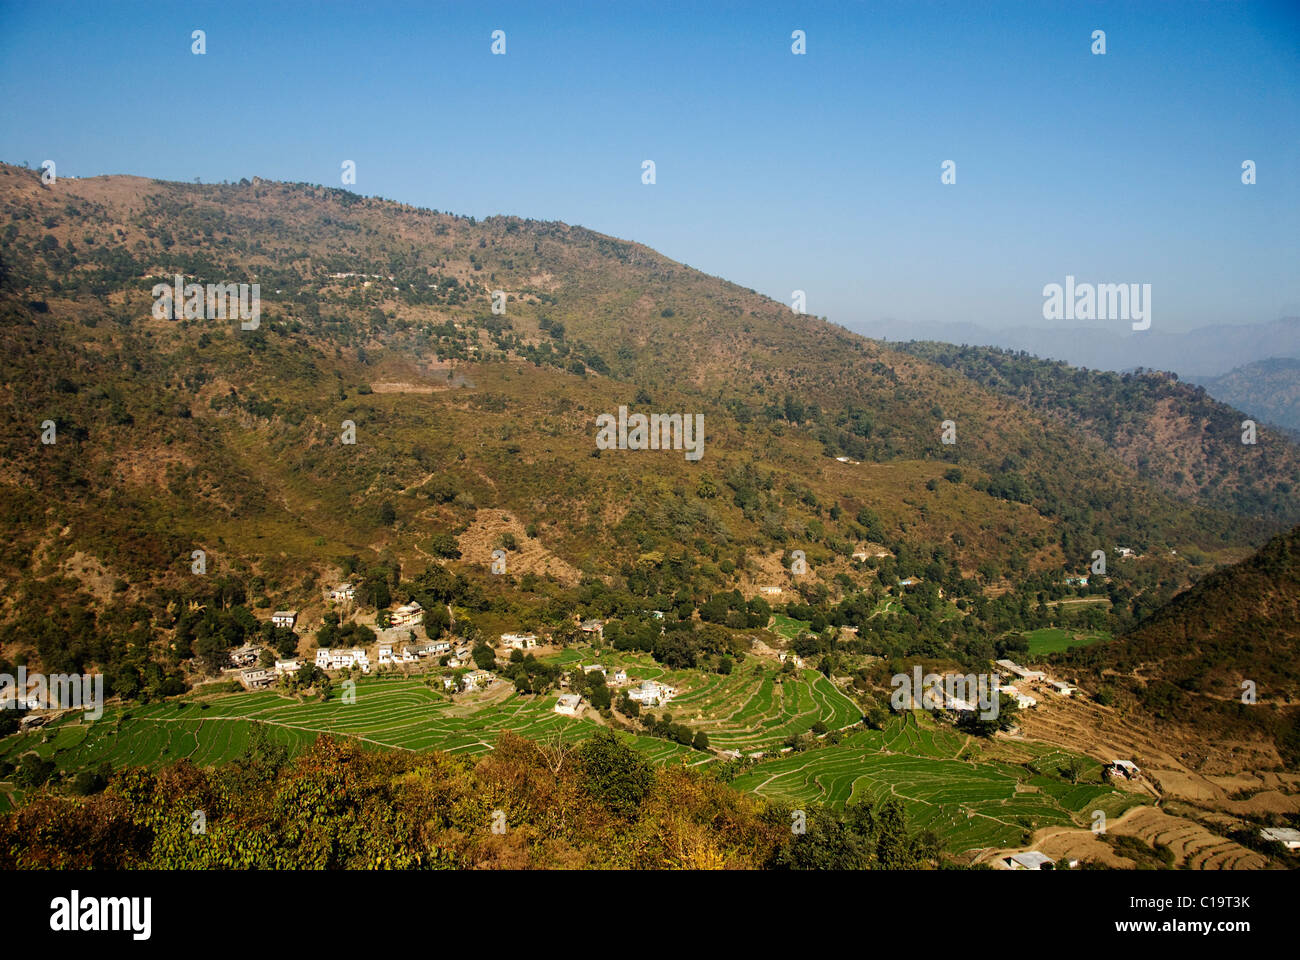 Aerial view of houses on a hill, Rishikesh, Uttarakhand, India Stock Photo